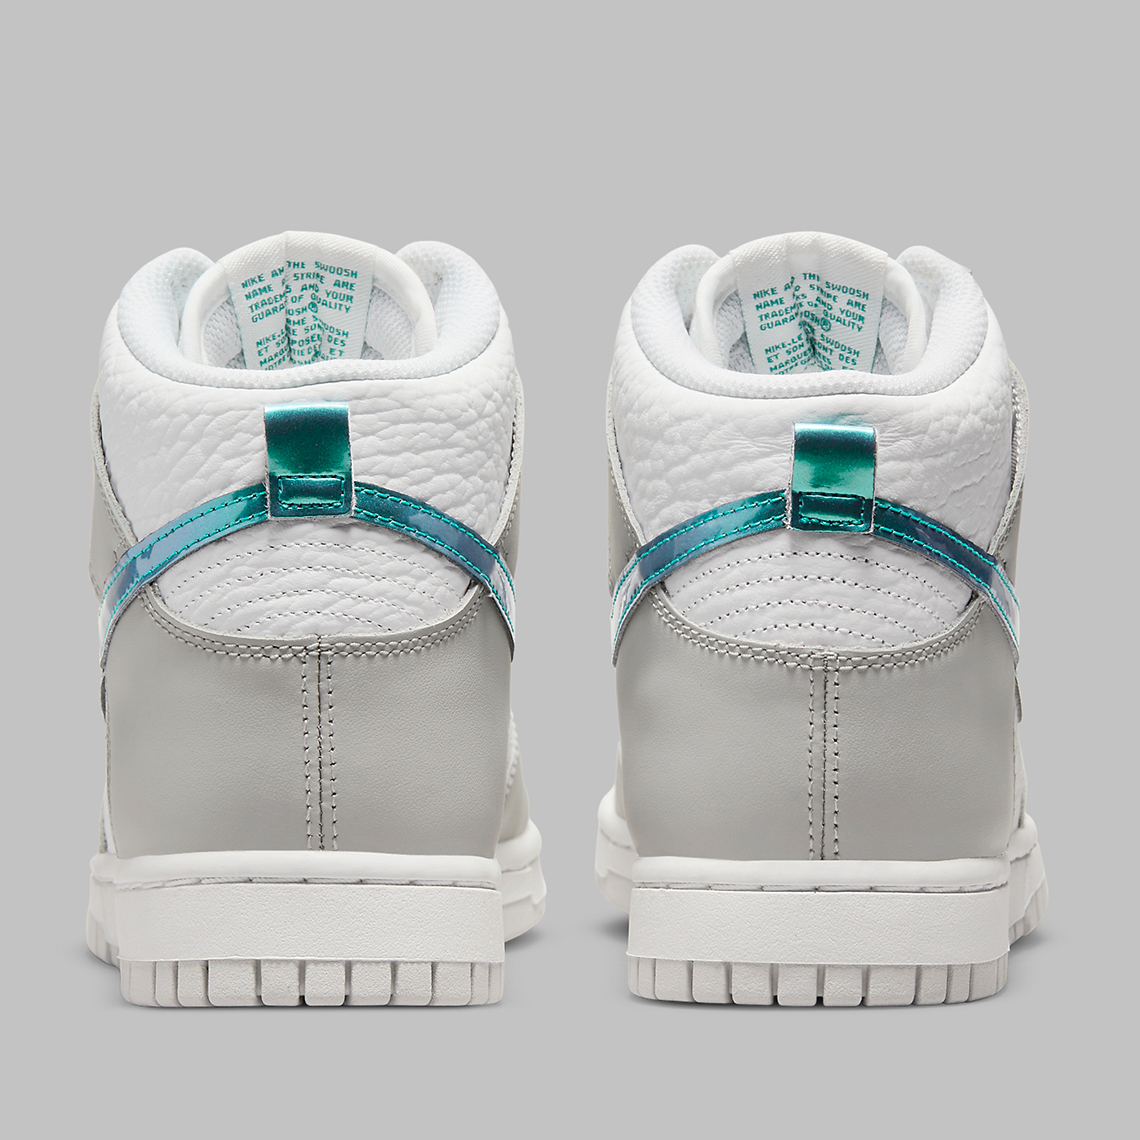 nike lunar 10 degree head for sale in california White Grey Turquoise Dr7855 100 7